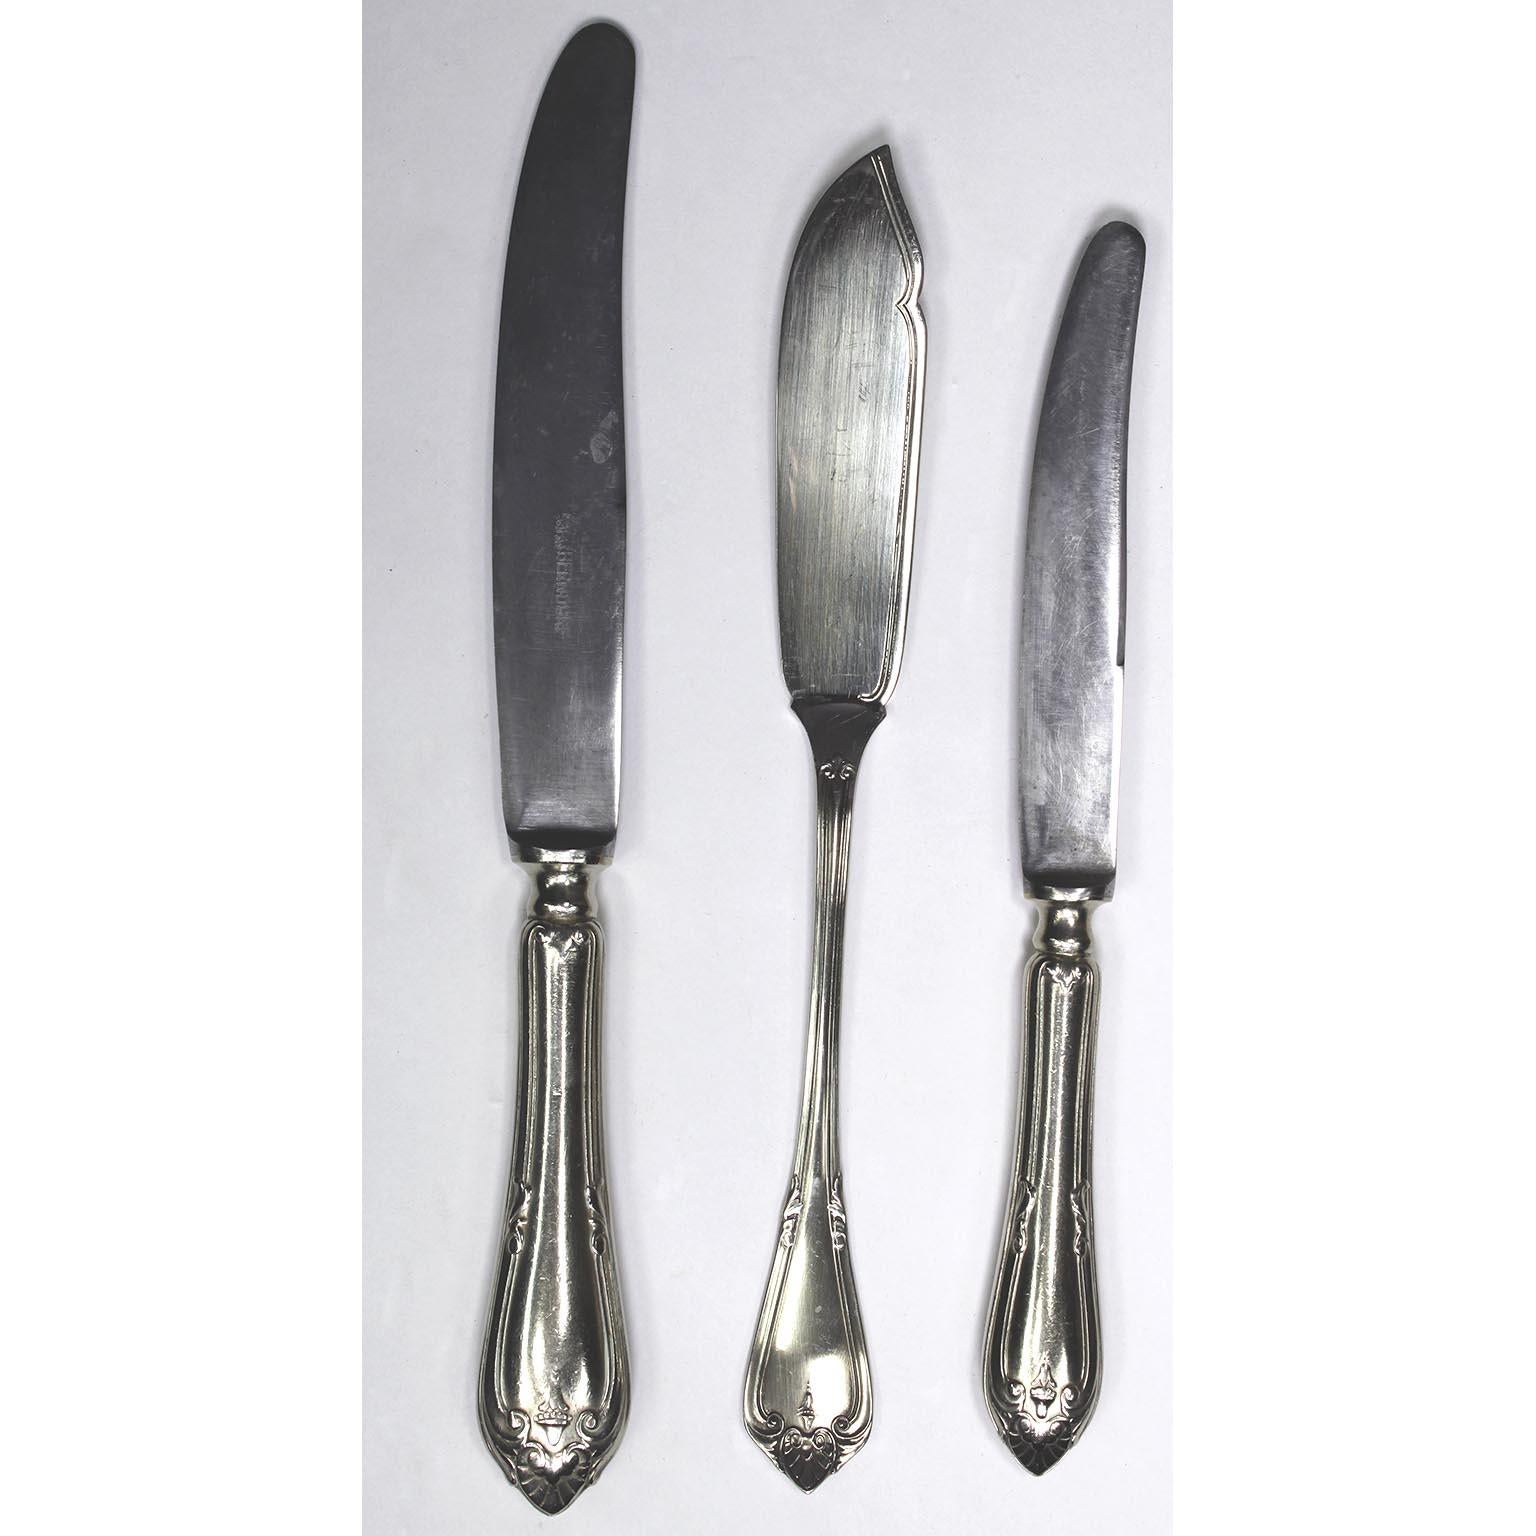 A Fine Early 20th Century 152 Piece Austrian Flatware Set by Berndorf Alpacca For Sale 2